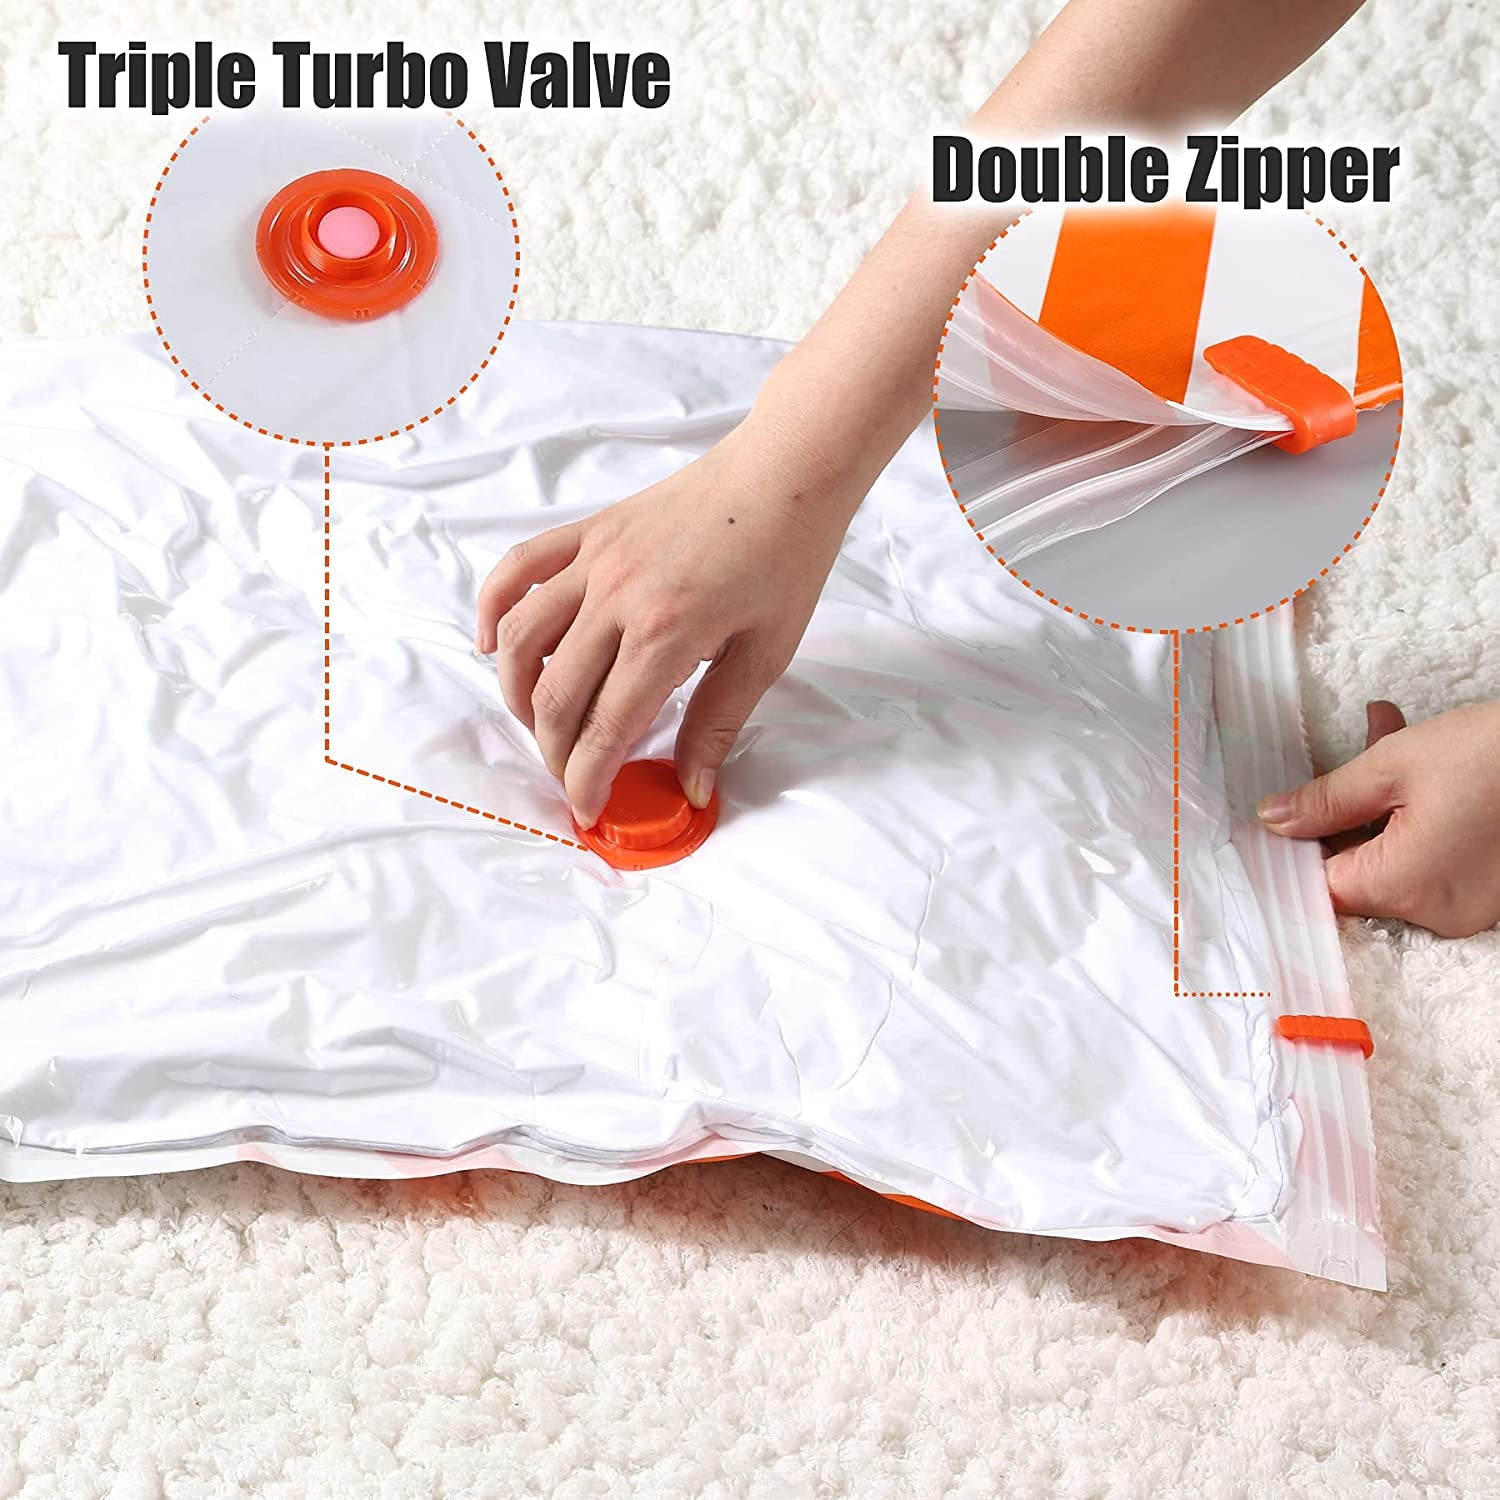 Vacuum Storage Bags 10 Pack Reusable Vacuum Sealer Bags, Compression Bags with Hand Pump for Clothes, Dresses, Travel